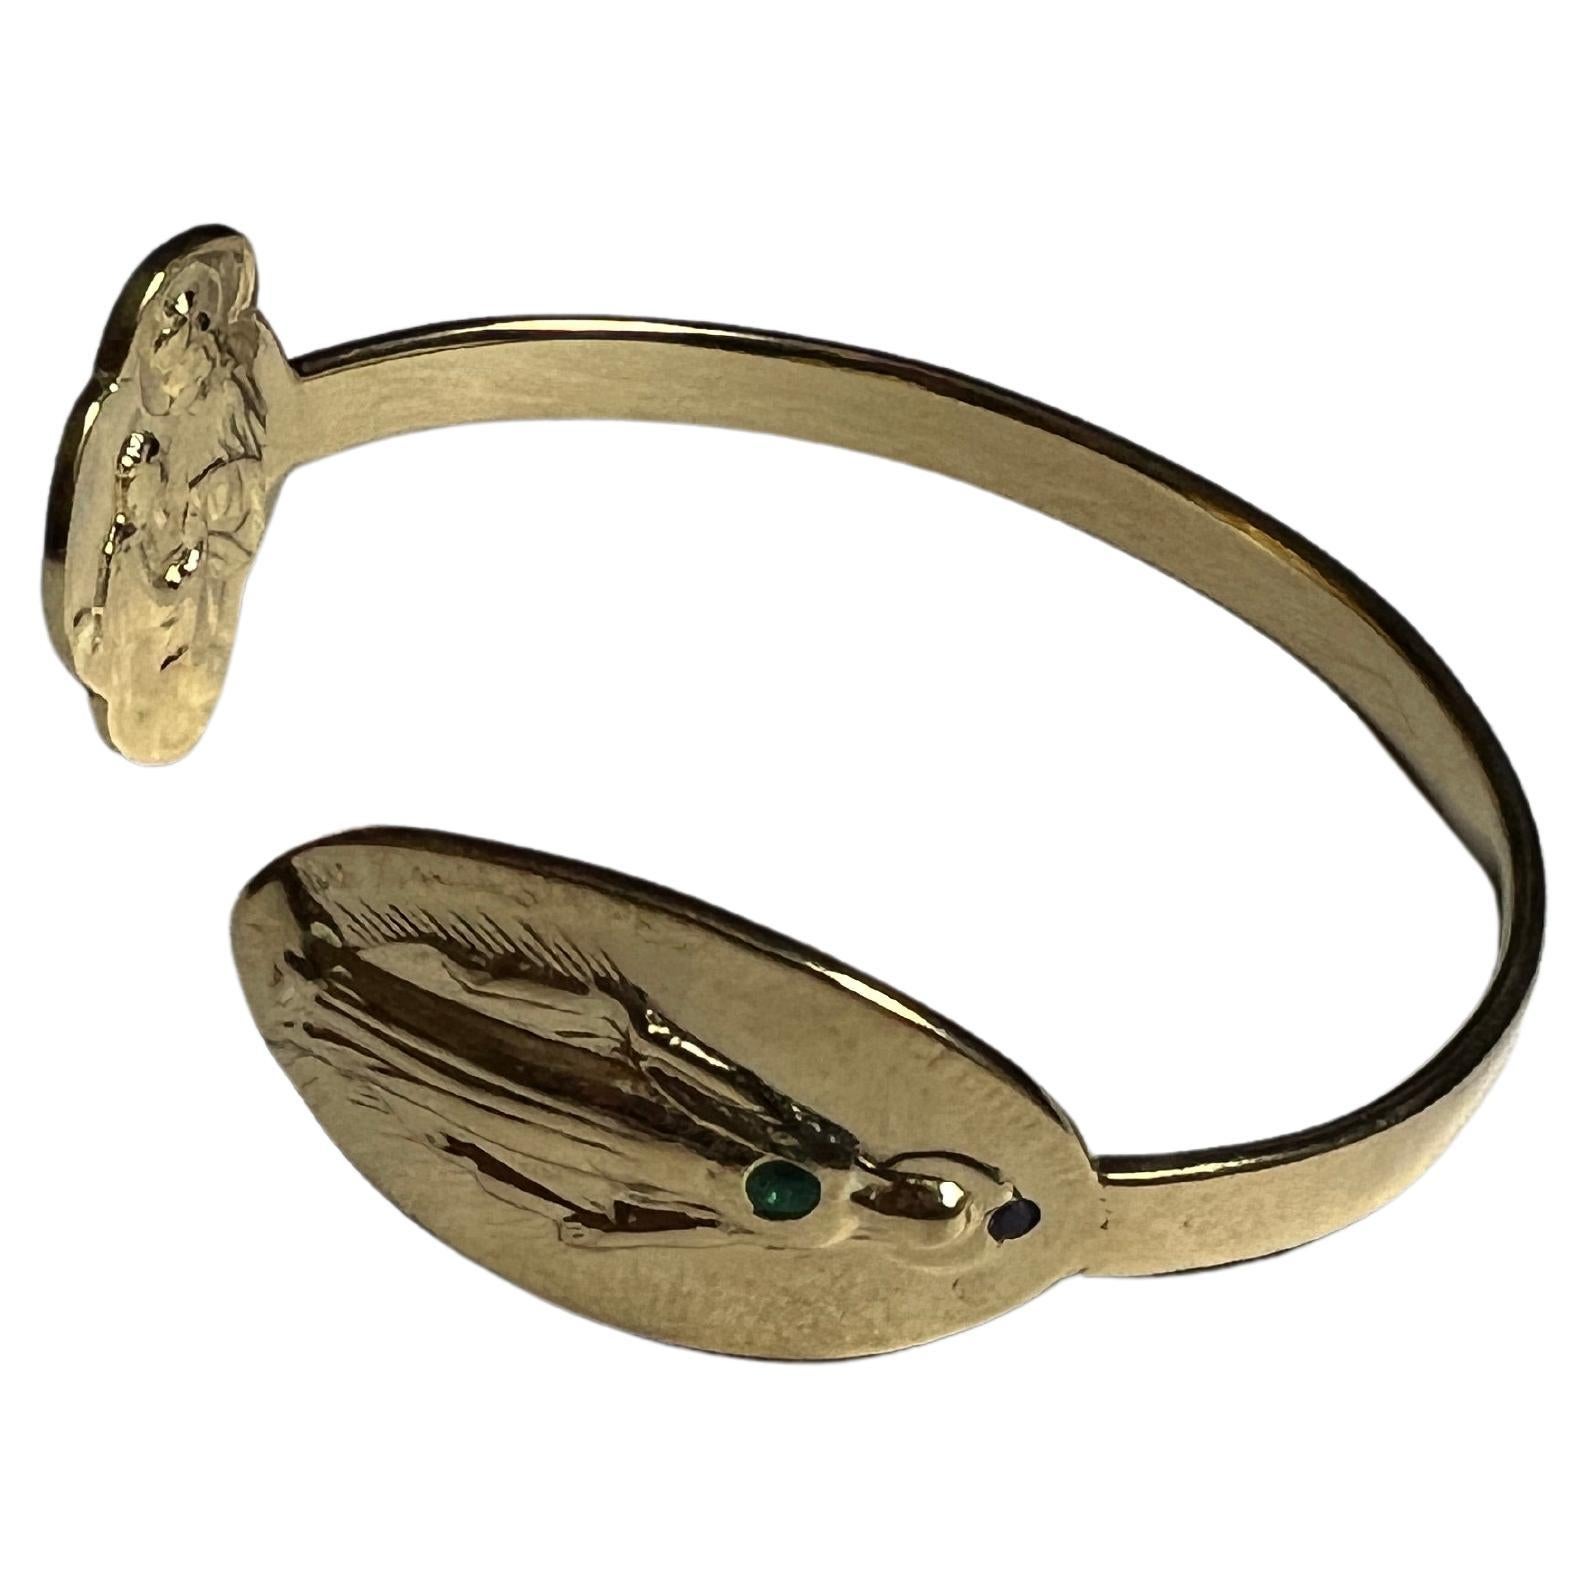 Emerald Ruby Virgin Mary Bangle Bracelet Cuff Gold Plated 
Size Small/Medium

Designer: J Dauphin

Symbols or medals can become a powerful tool in our arsenal for the spiritual. 
Since ancient times spiritual pendants, religious medals has been used